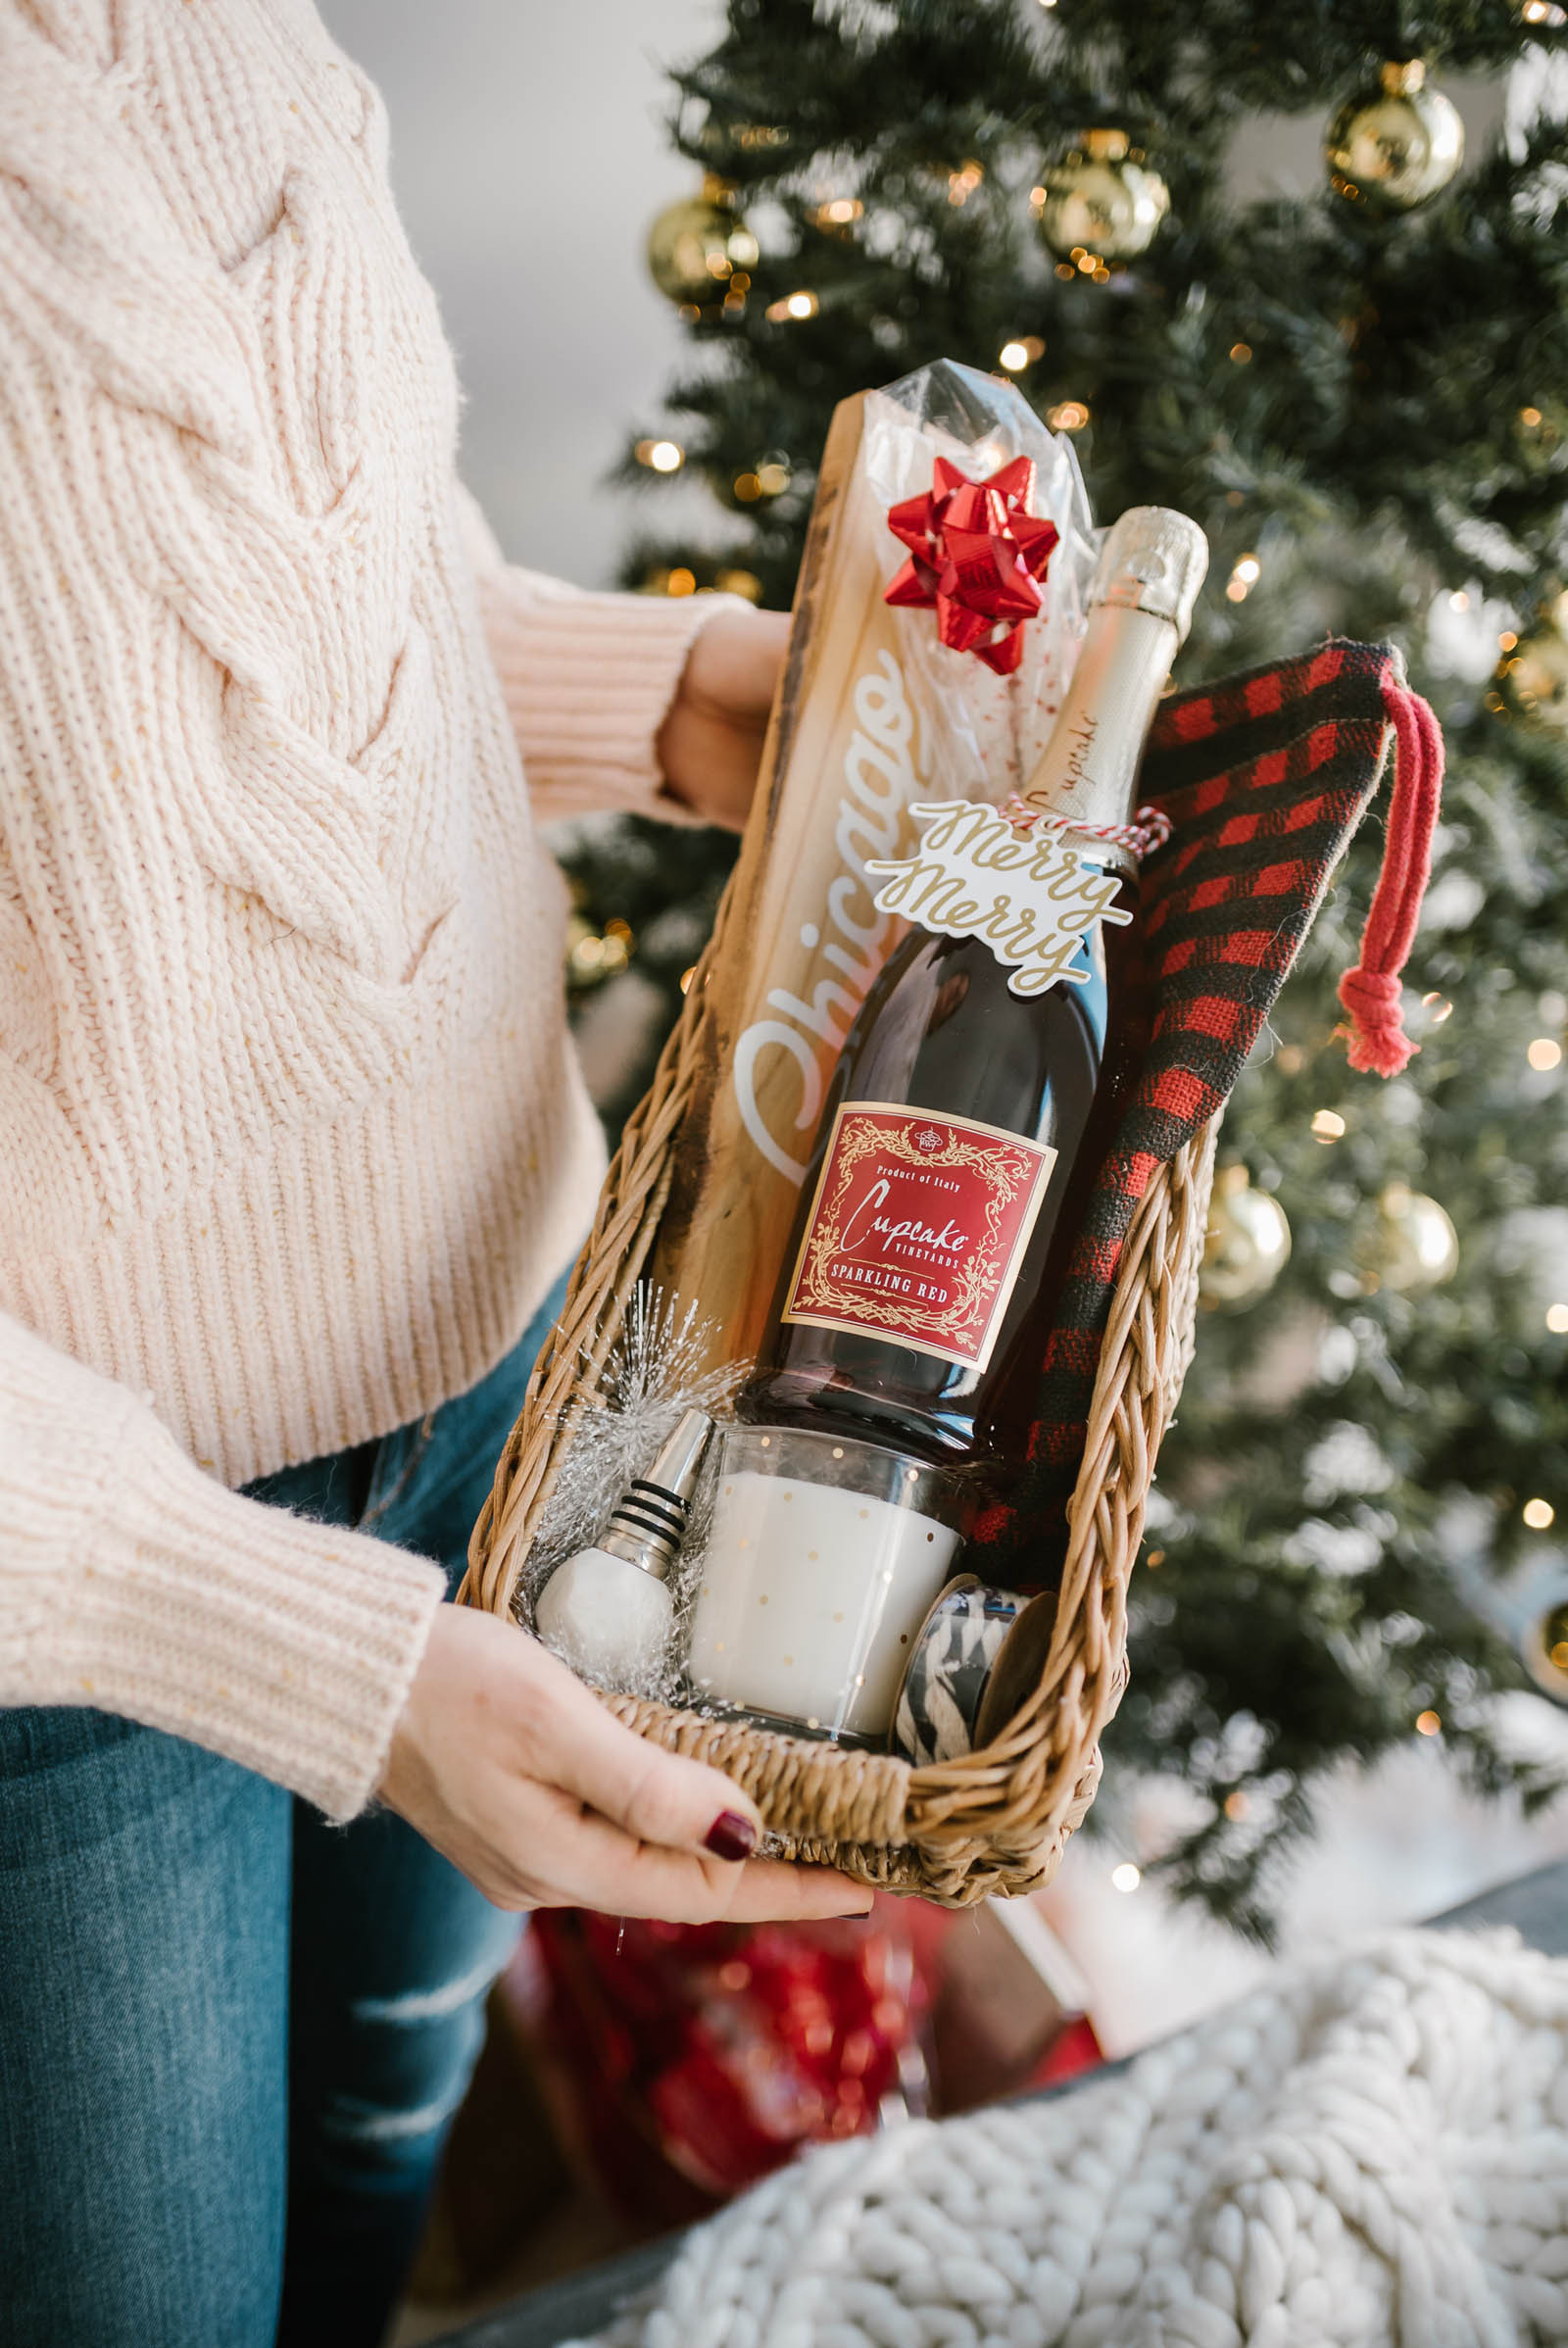 Making Gift Basket Ideas
 Last Minute Holiday Idea Easy Homemade Gift Baskets